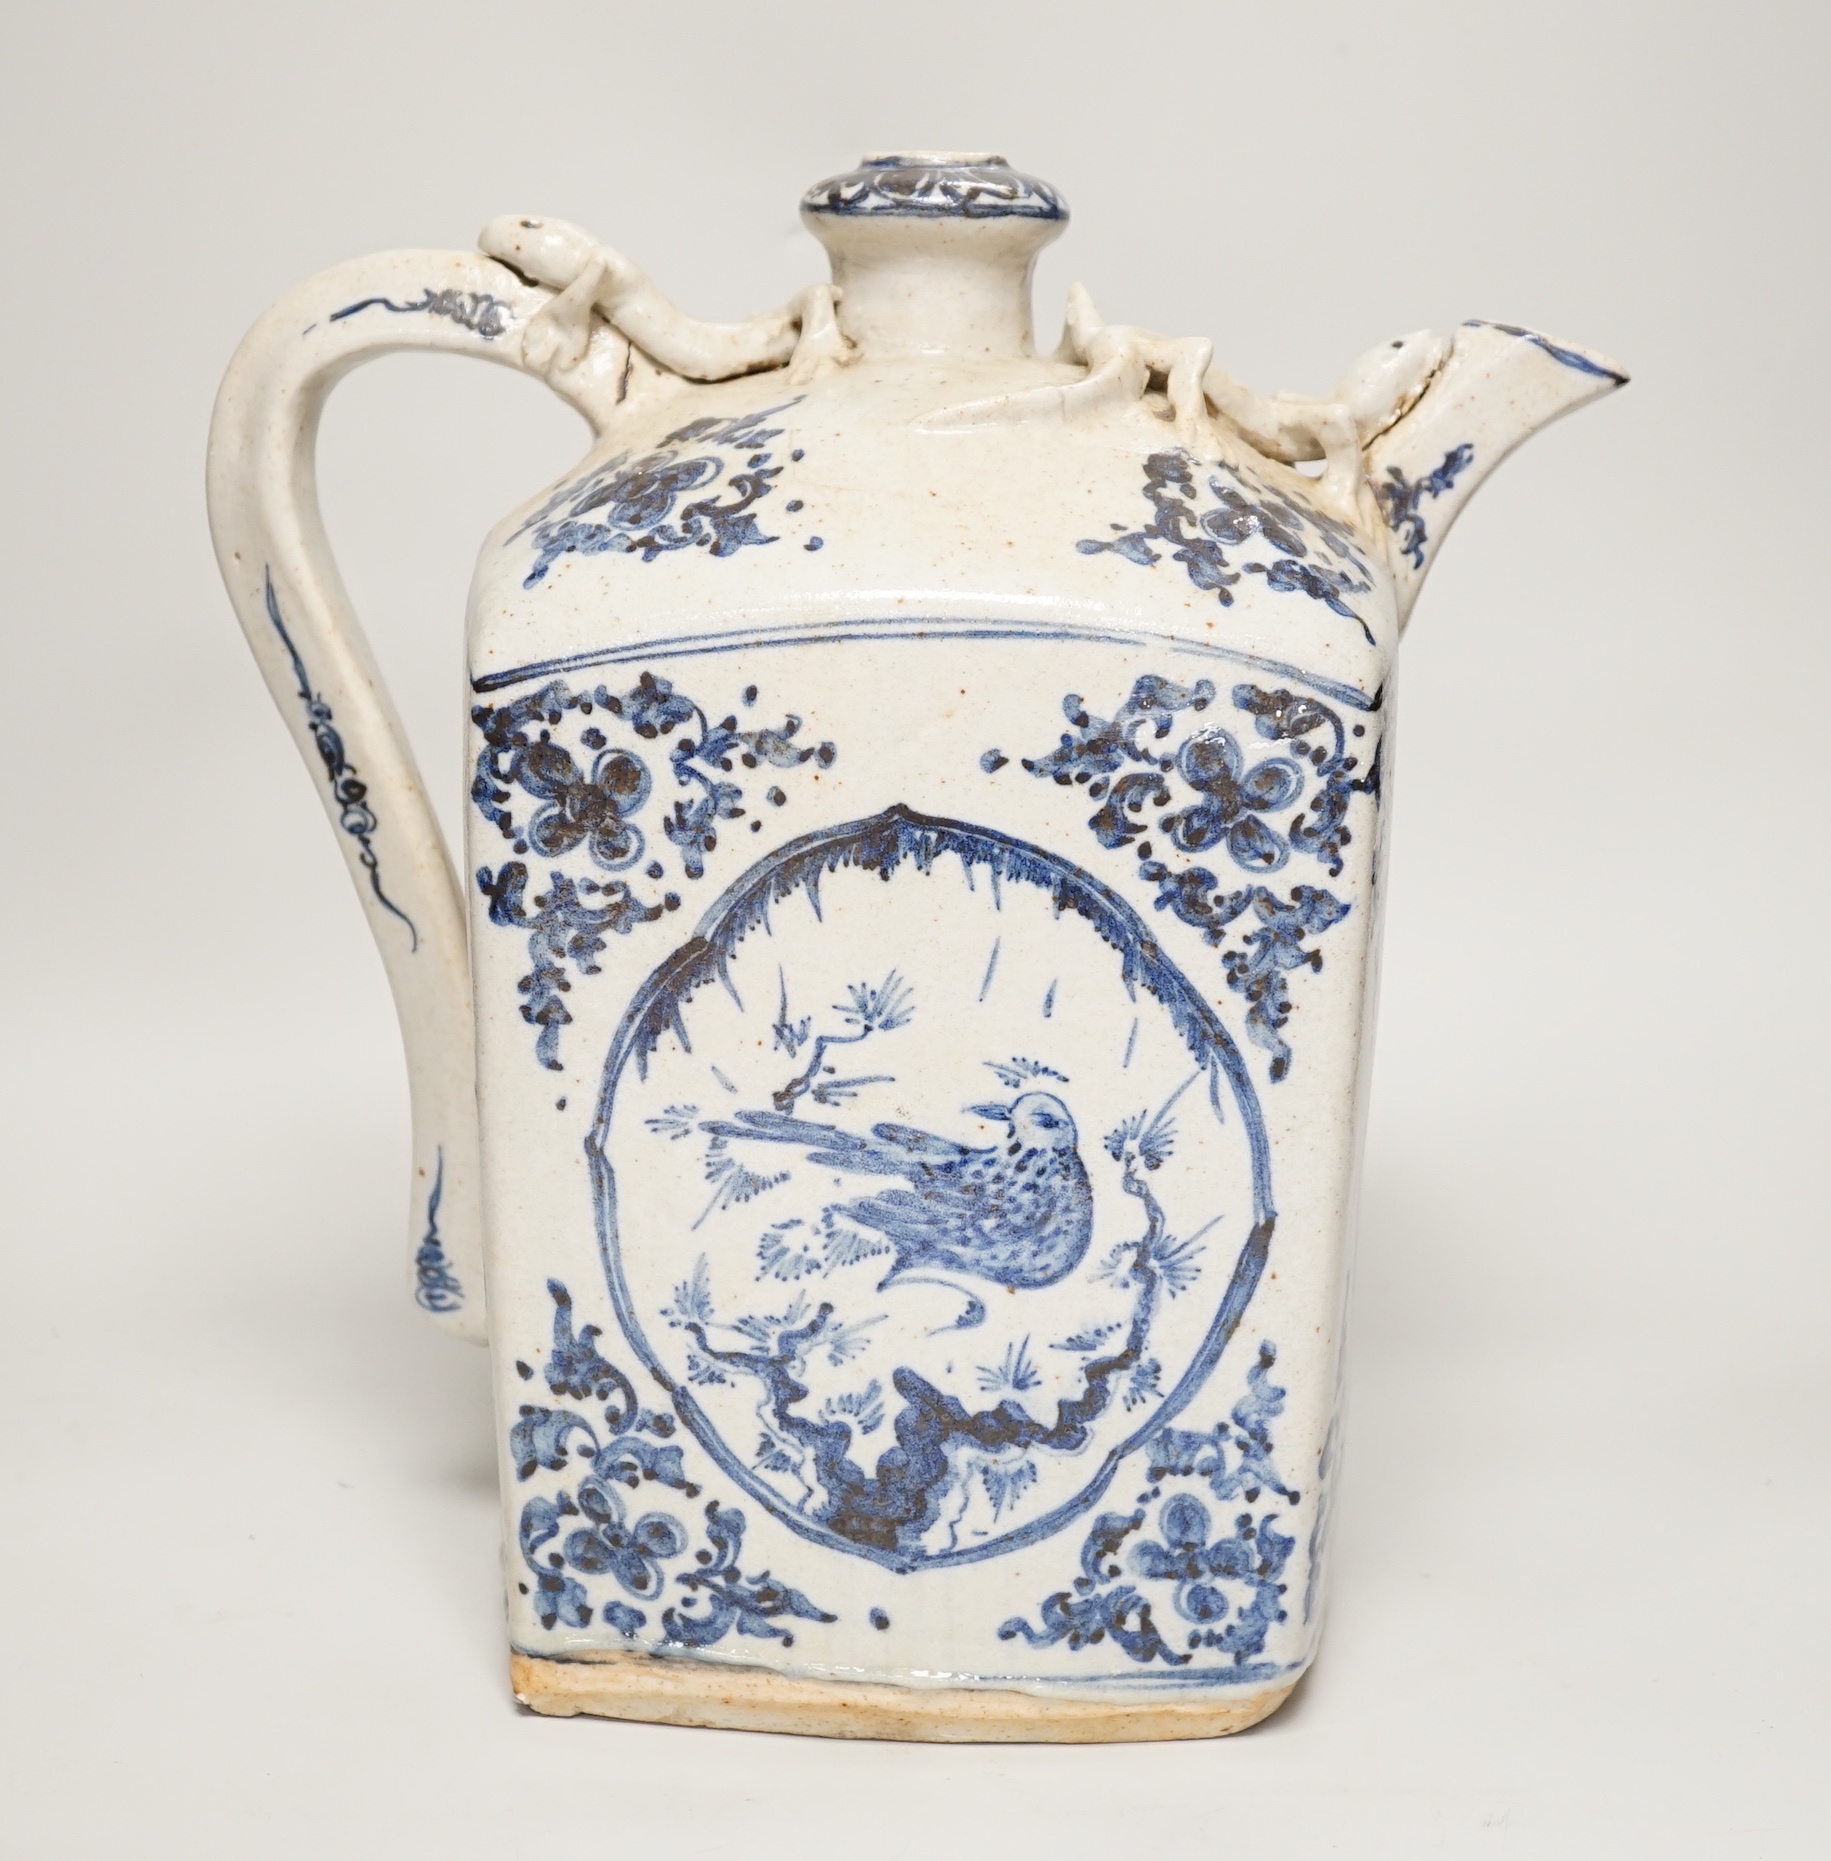 A blue and white Chinese pottery teapot, 31cm high